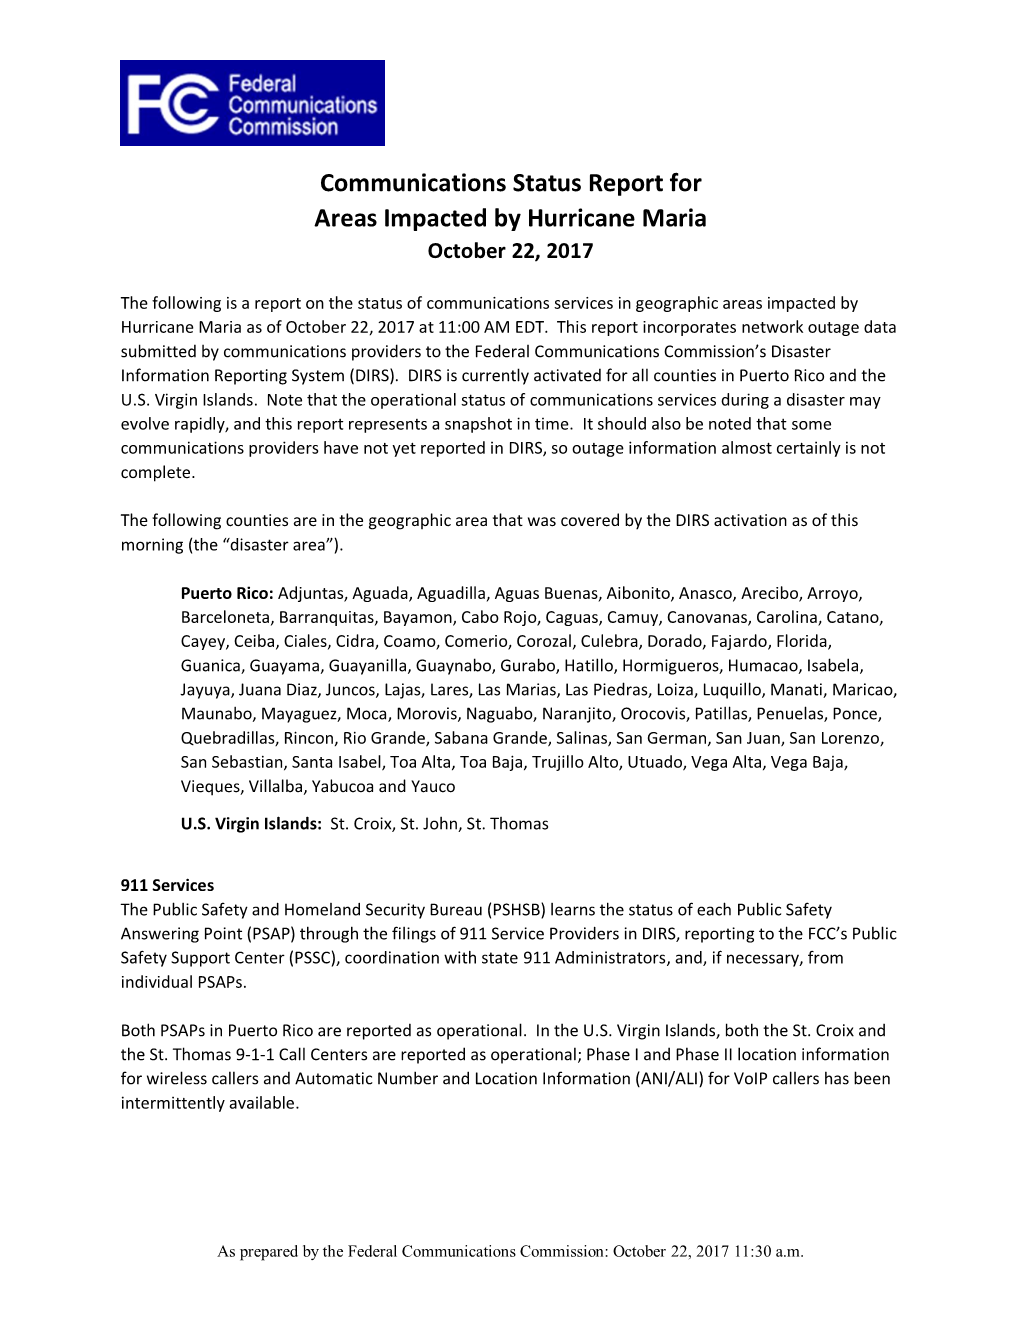 Communications Status Report for Areas Impacted by Hurricane Maria October 22, 2017